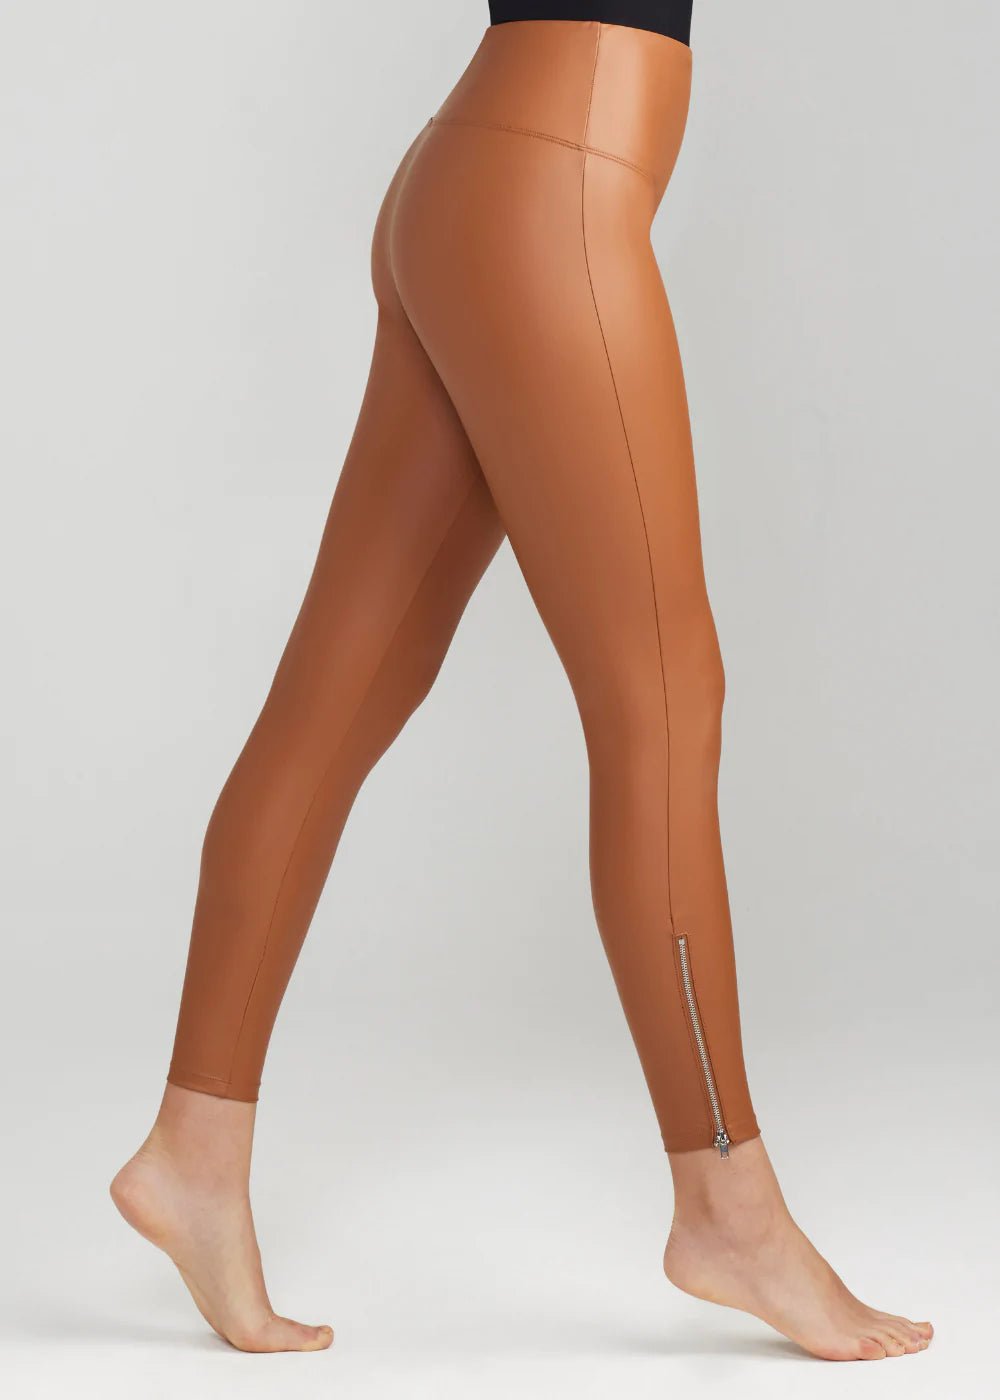 AsYou tie detail seamed legging with split hem in brown - part of a set -  ShopStyle